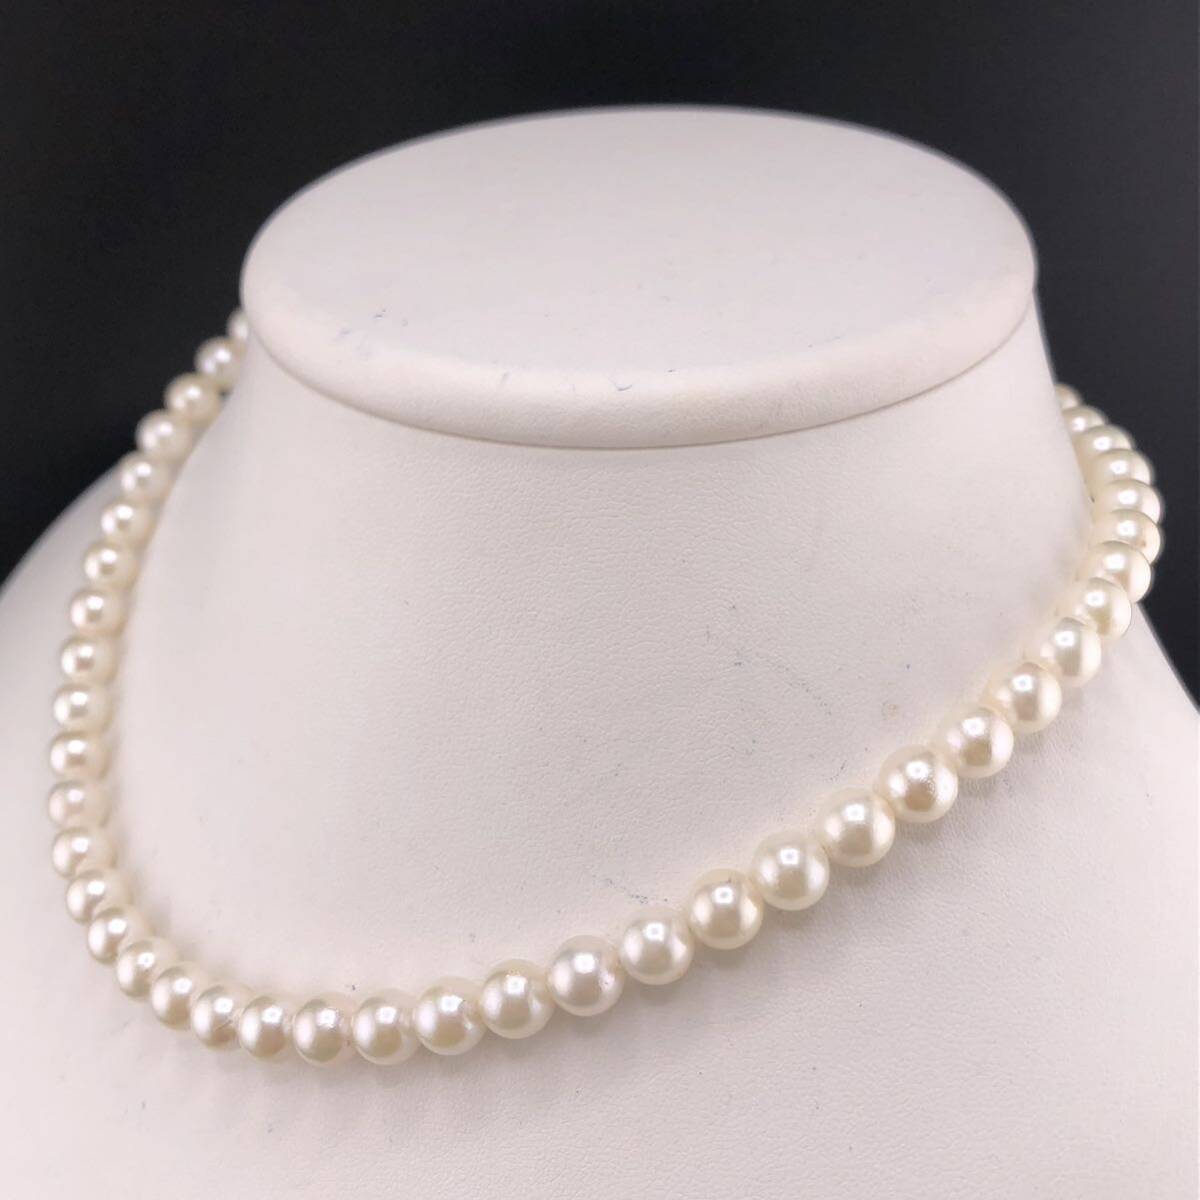 E04-4036☆ アコヤパールネックレス 7.0mm 39cm 32.2g ( アコヤ真珠 Pearl necklace SILVER )の画像2